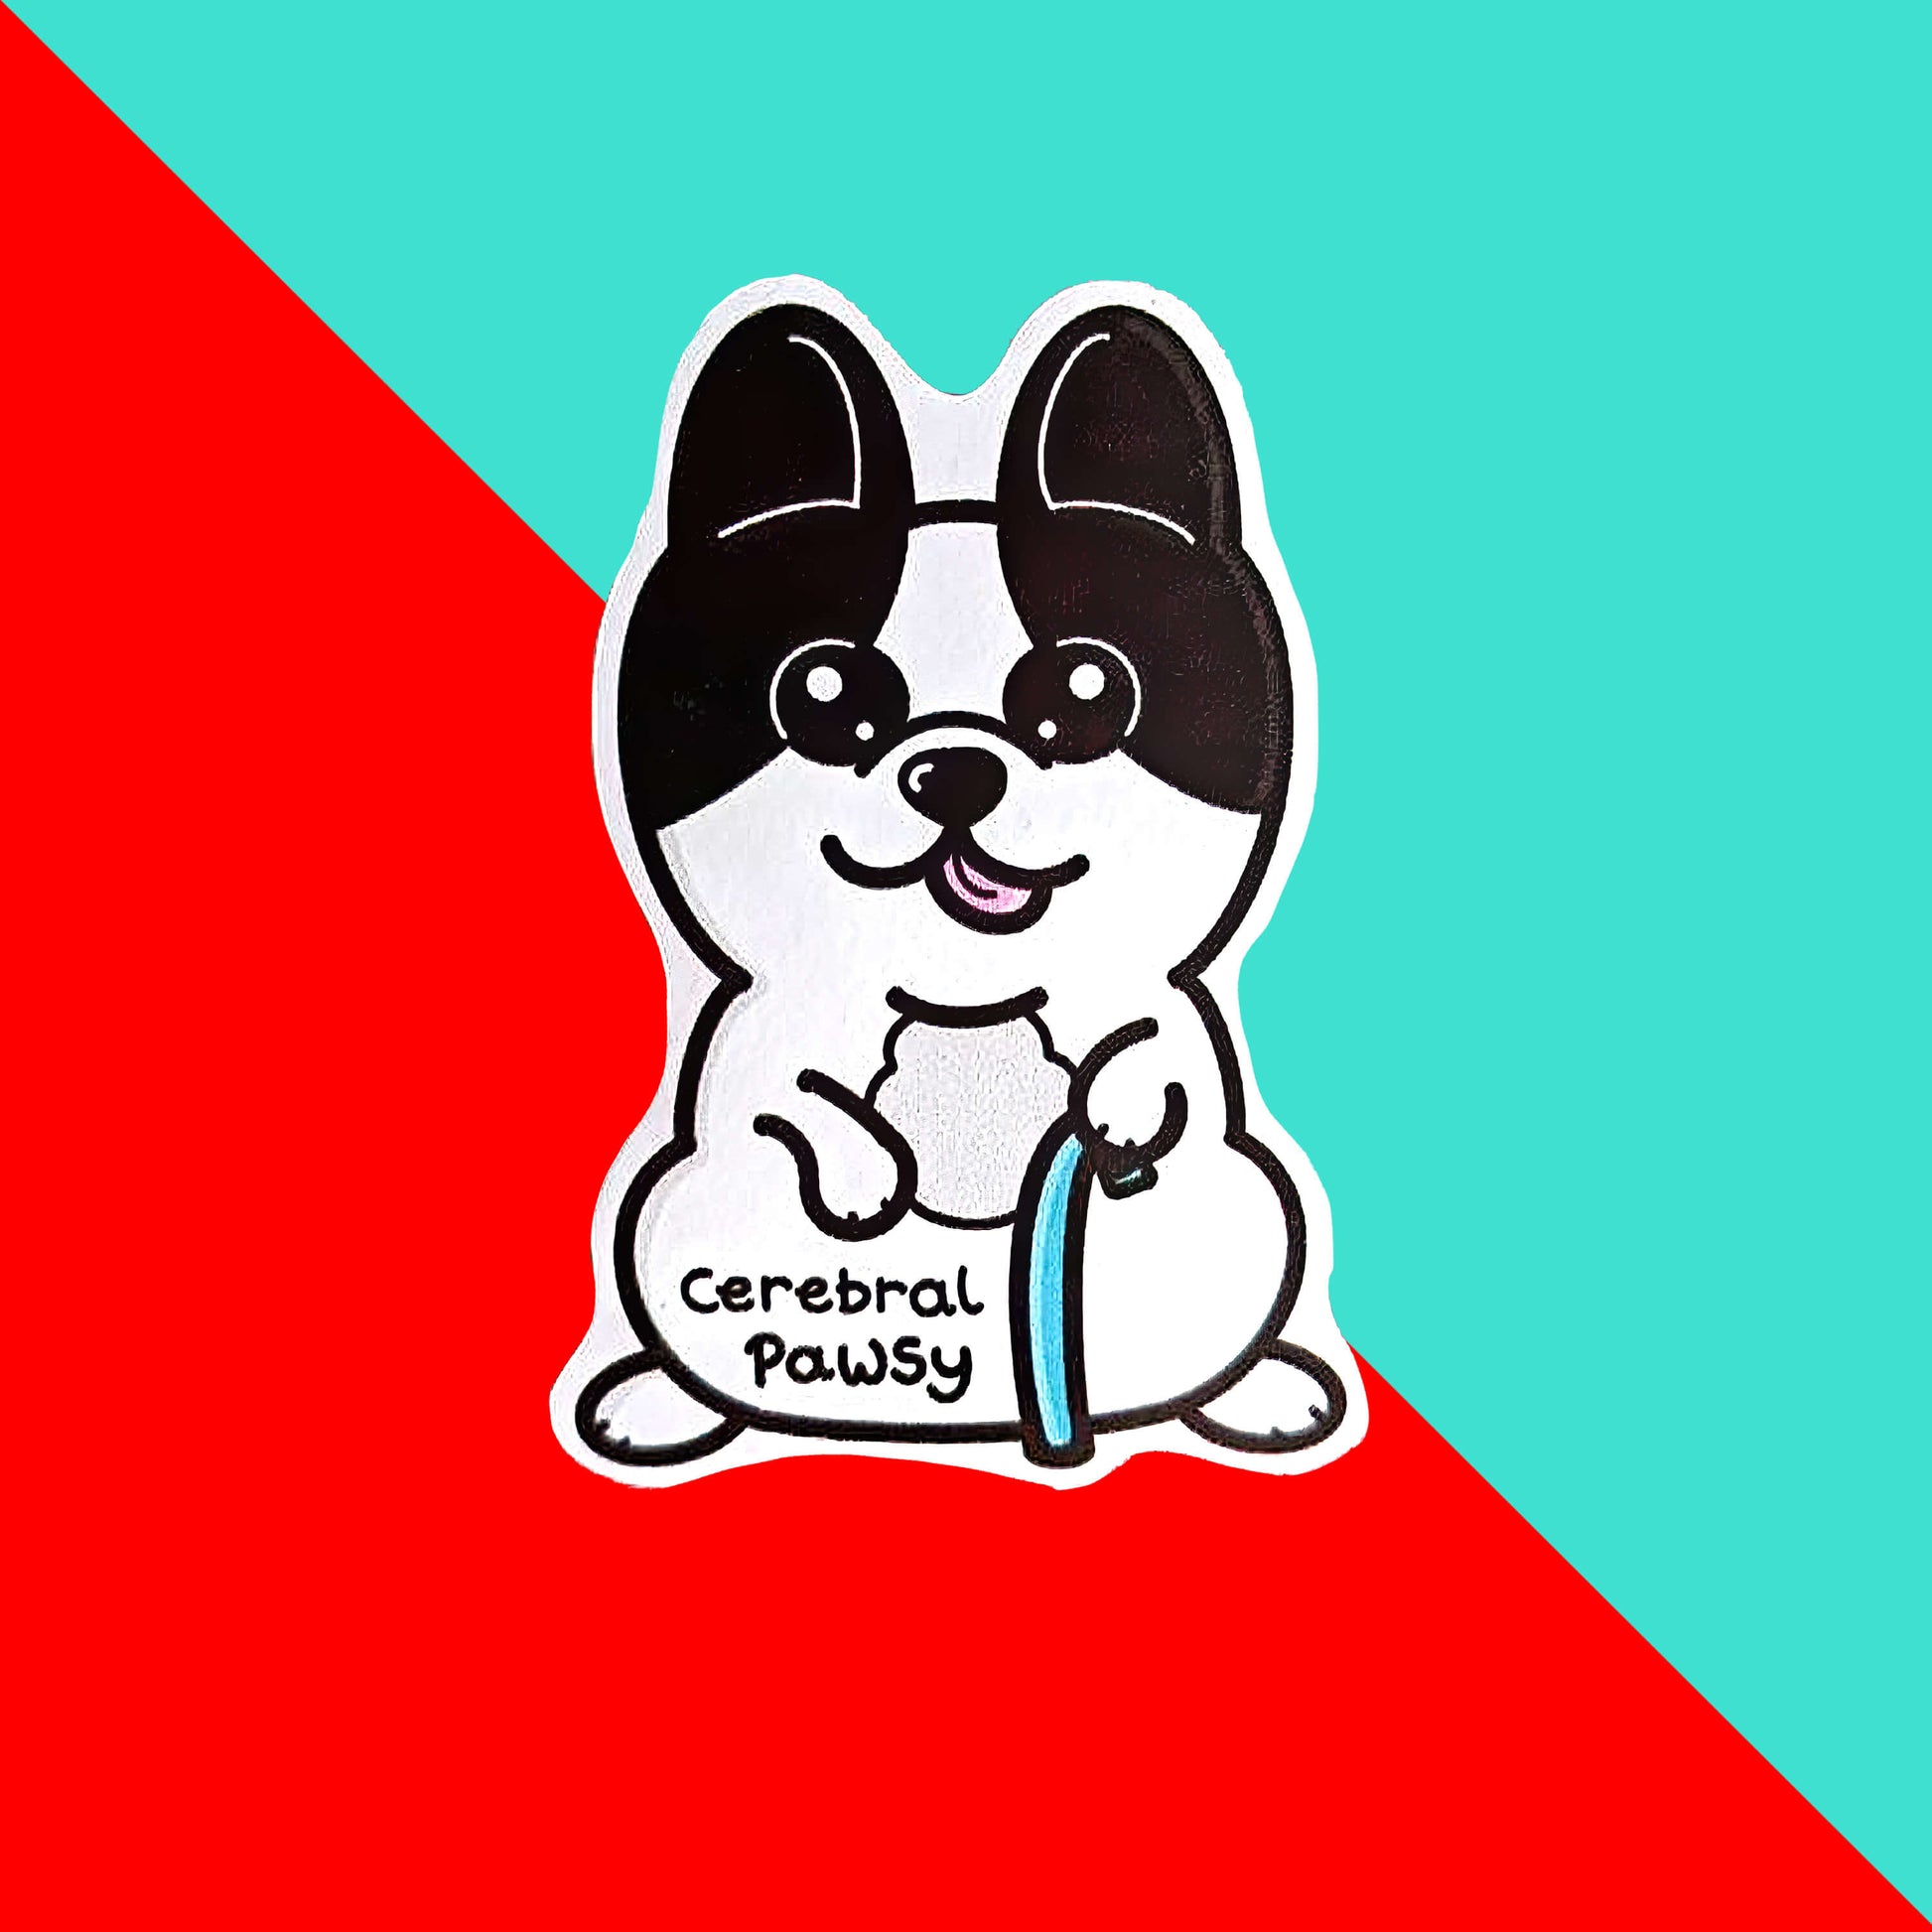 The Cerebral Pawsy Sticker - Cerebral Palsy on a red and blue background. The sticker is a white and black dog with big eyes and pointy ears. The dog has it's pink tongue out and is standing on his back legs while holding a blue walking aid. 'Cerebral Pawsy' is written in black under it's tummy.